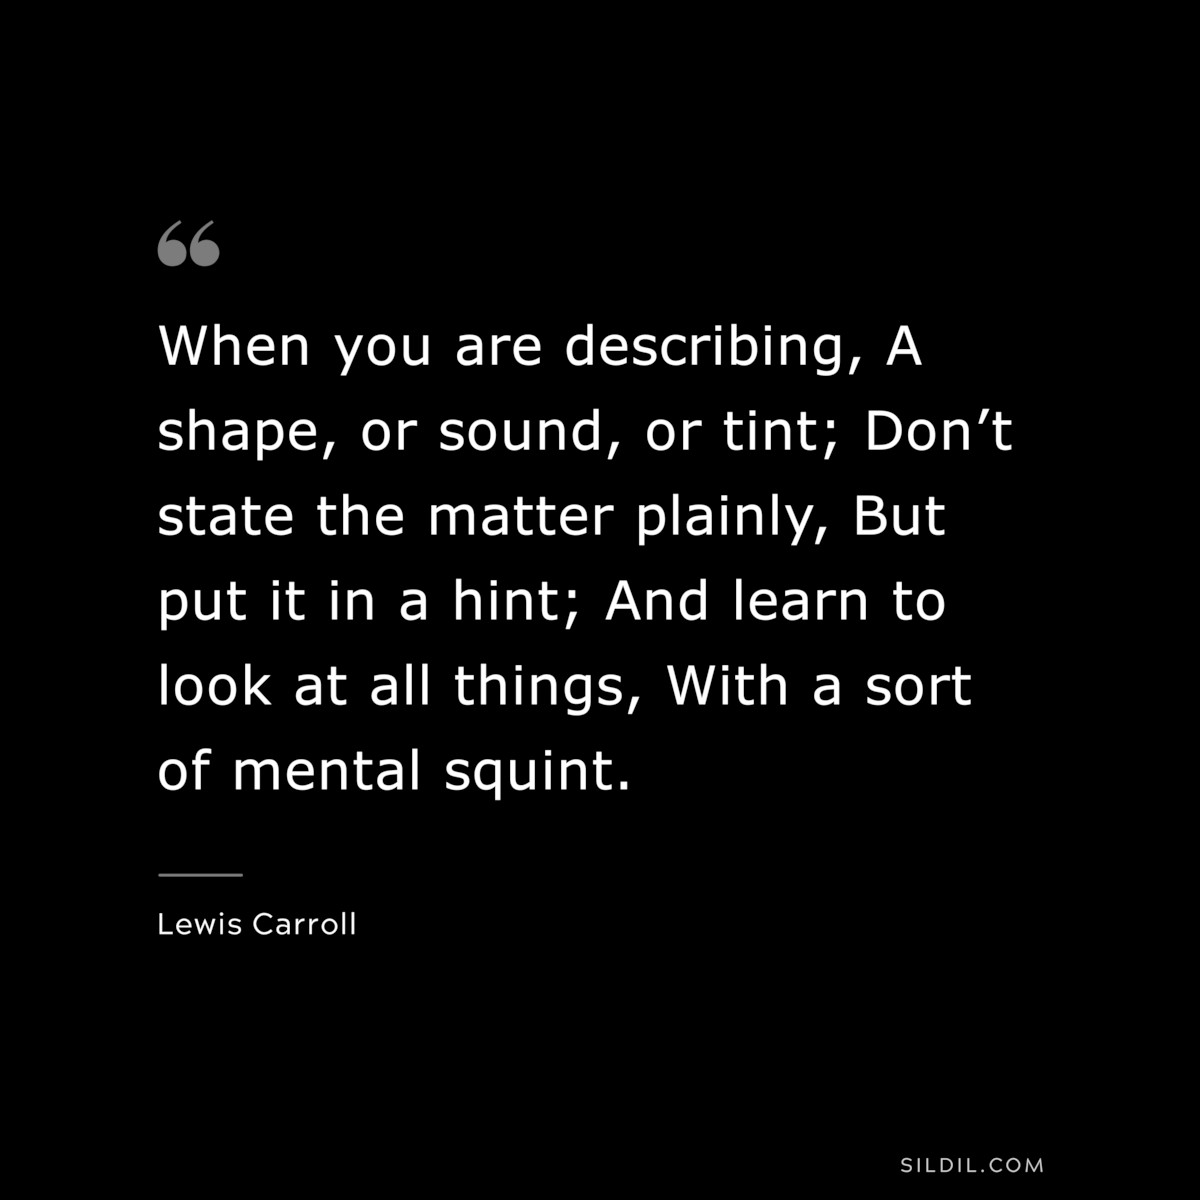 When you are describing, A shape, or sound, or tint; Don’t state the matter plainly, But put it in a hint; And learn to look at all things, With a sort of mental squint.